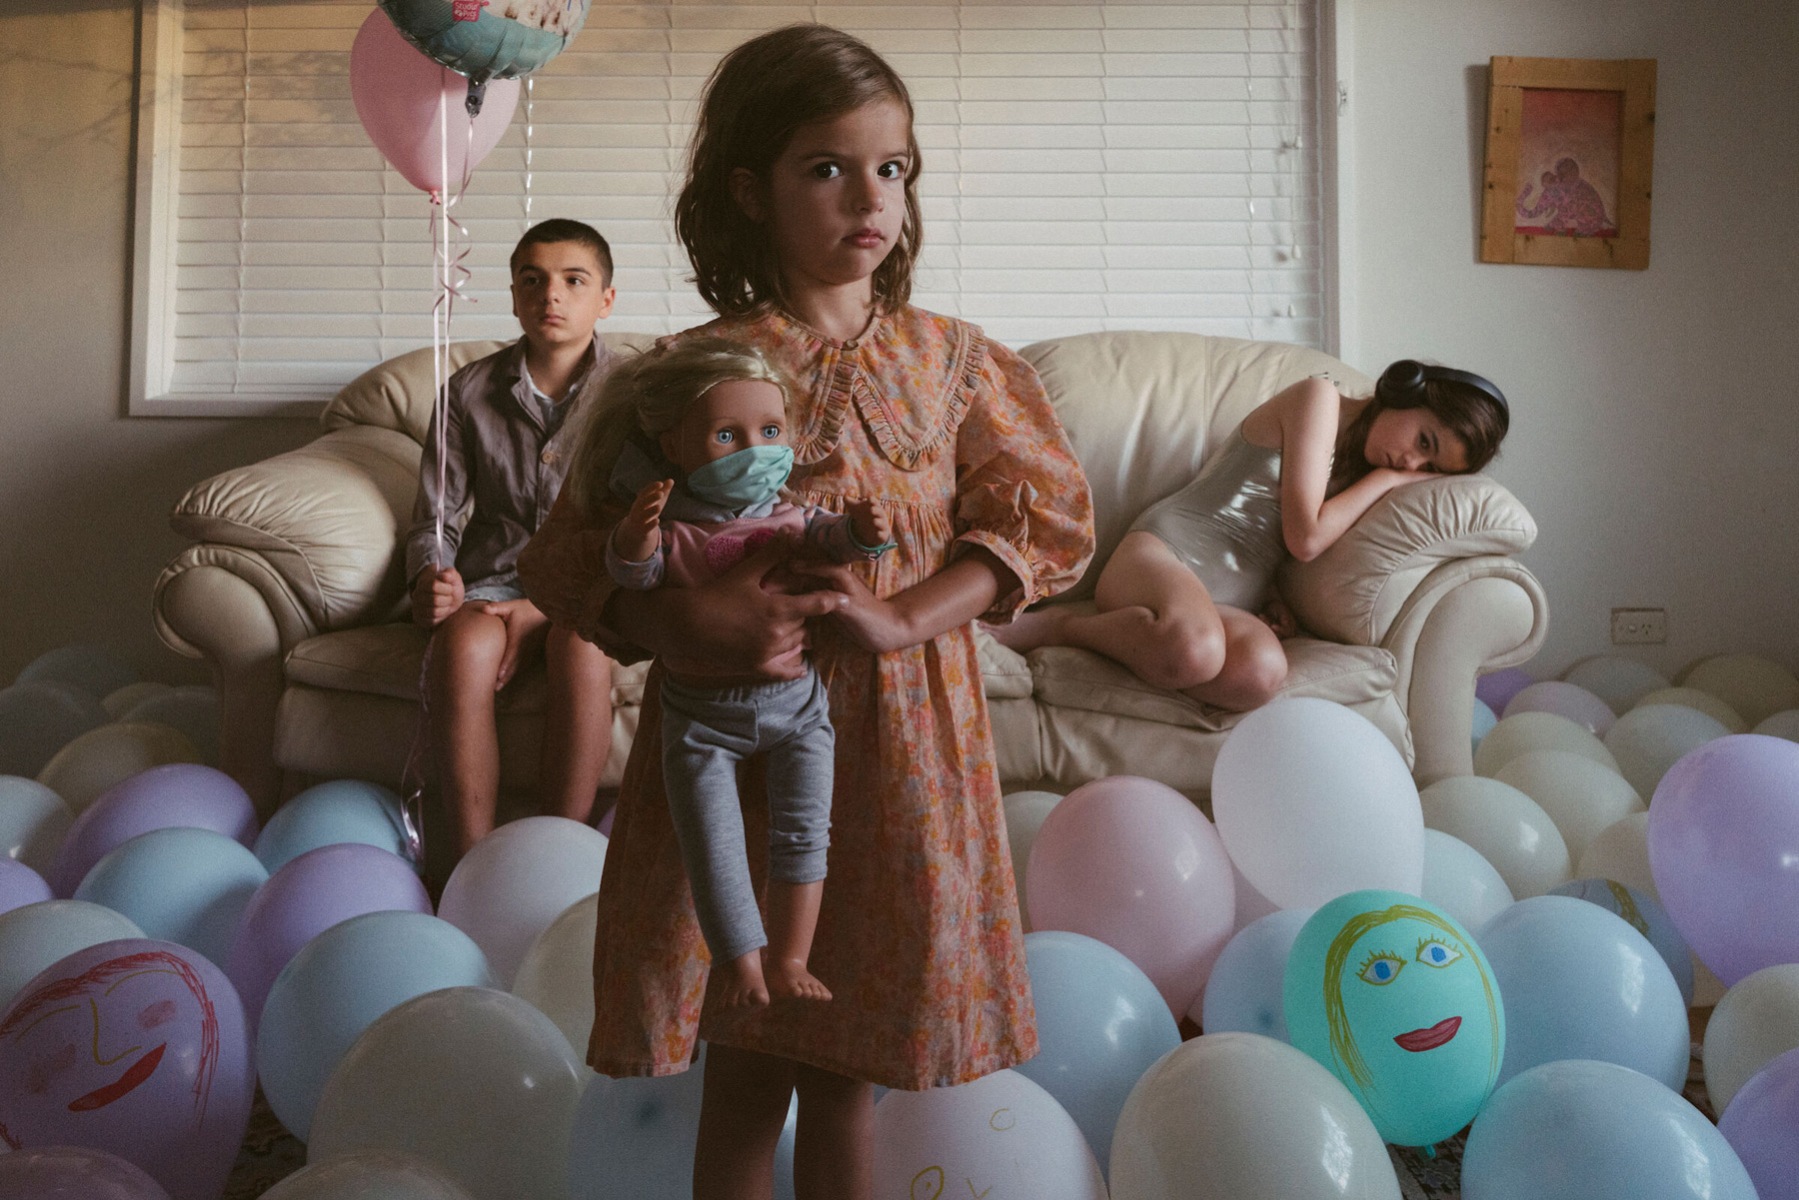 A photograph of three children in a living space surrounded by balloons, two are sitting on a couch and one is standing in the foreground, the child on the left is holding a balloon, the child on the right is wearing headphones and the child in the centre is holding a doll with a makeshift facemask